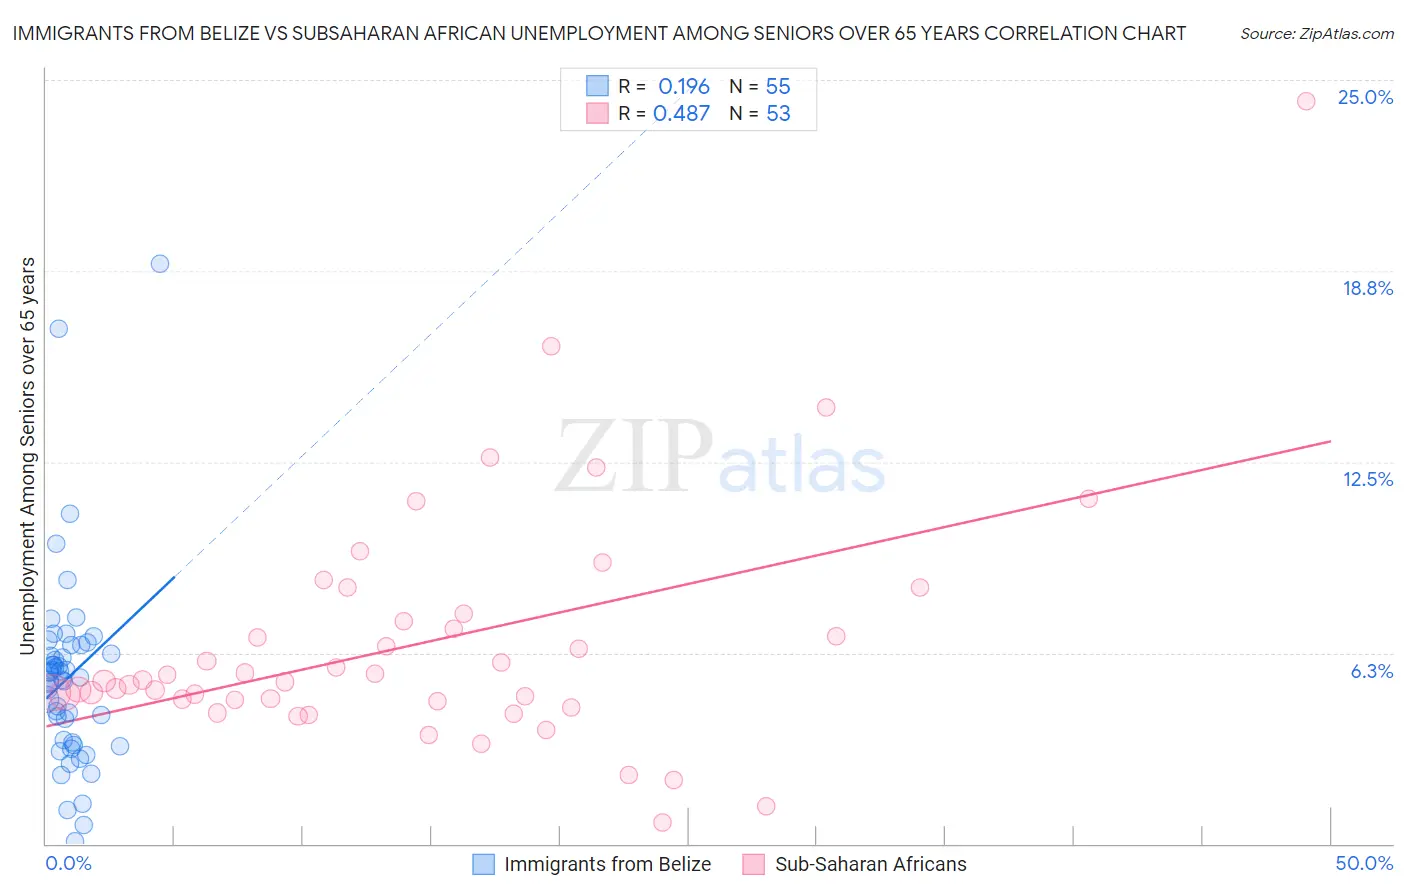 Immigrants from Belize vs Subsaharan African Unemployment Among Seniors over 65 years